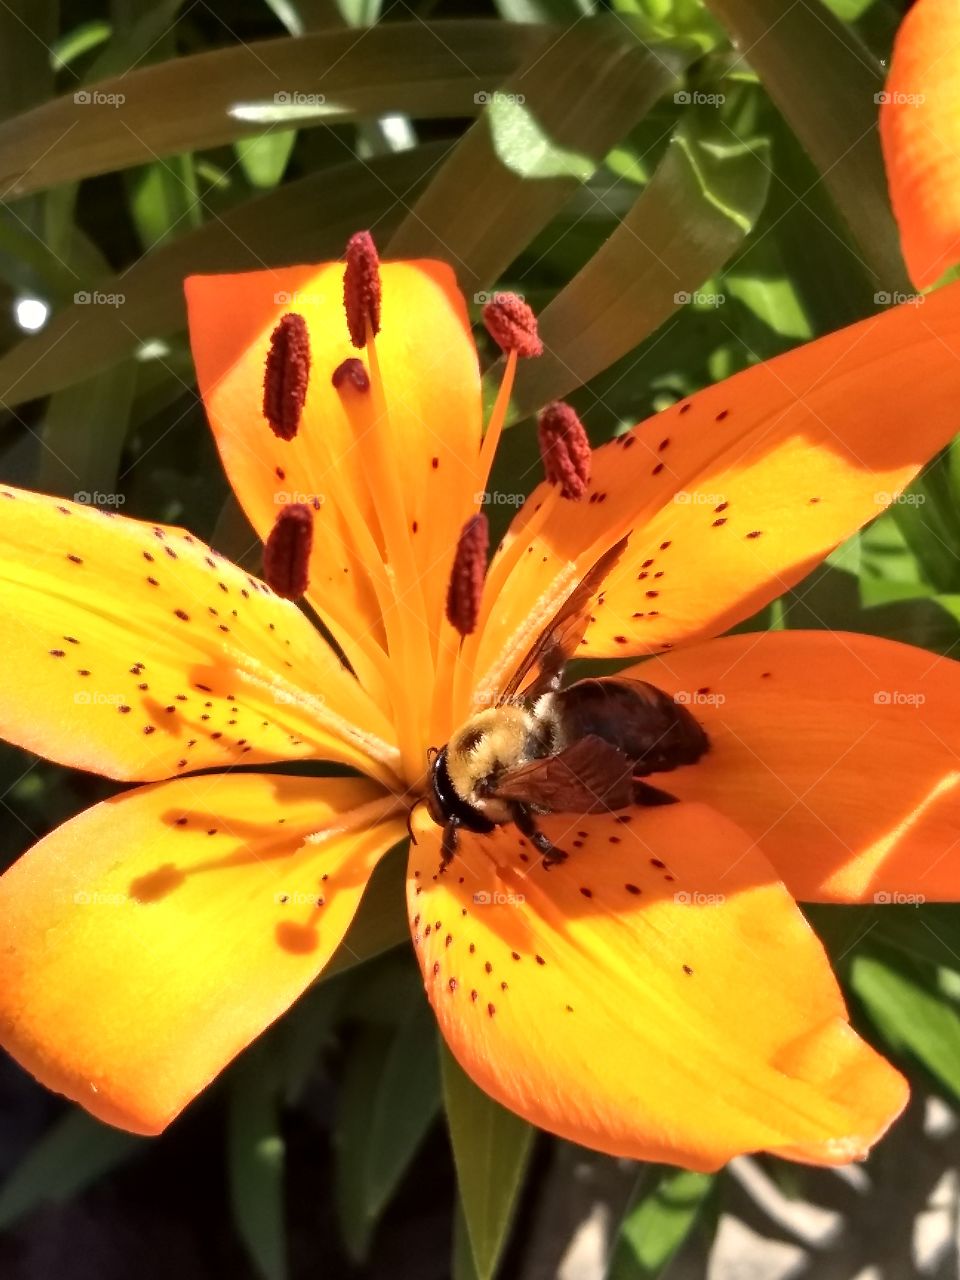 A little bee visiting my lillies